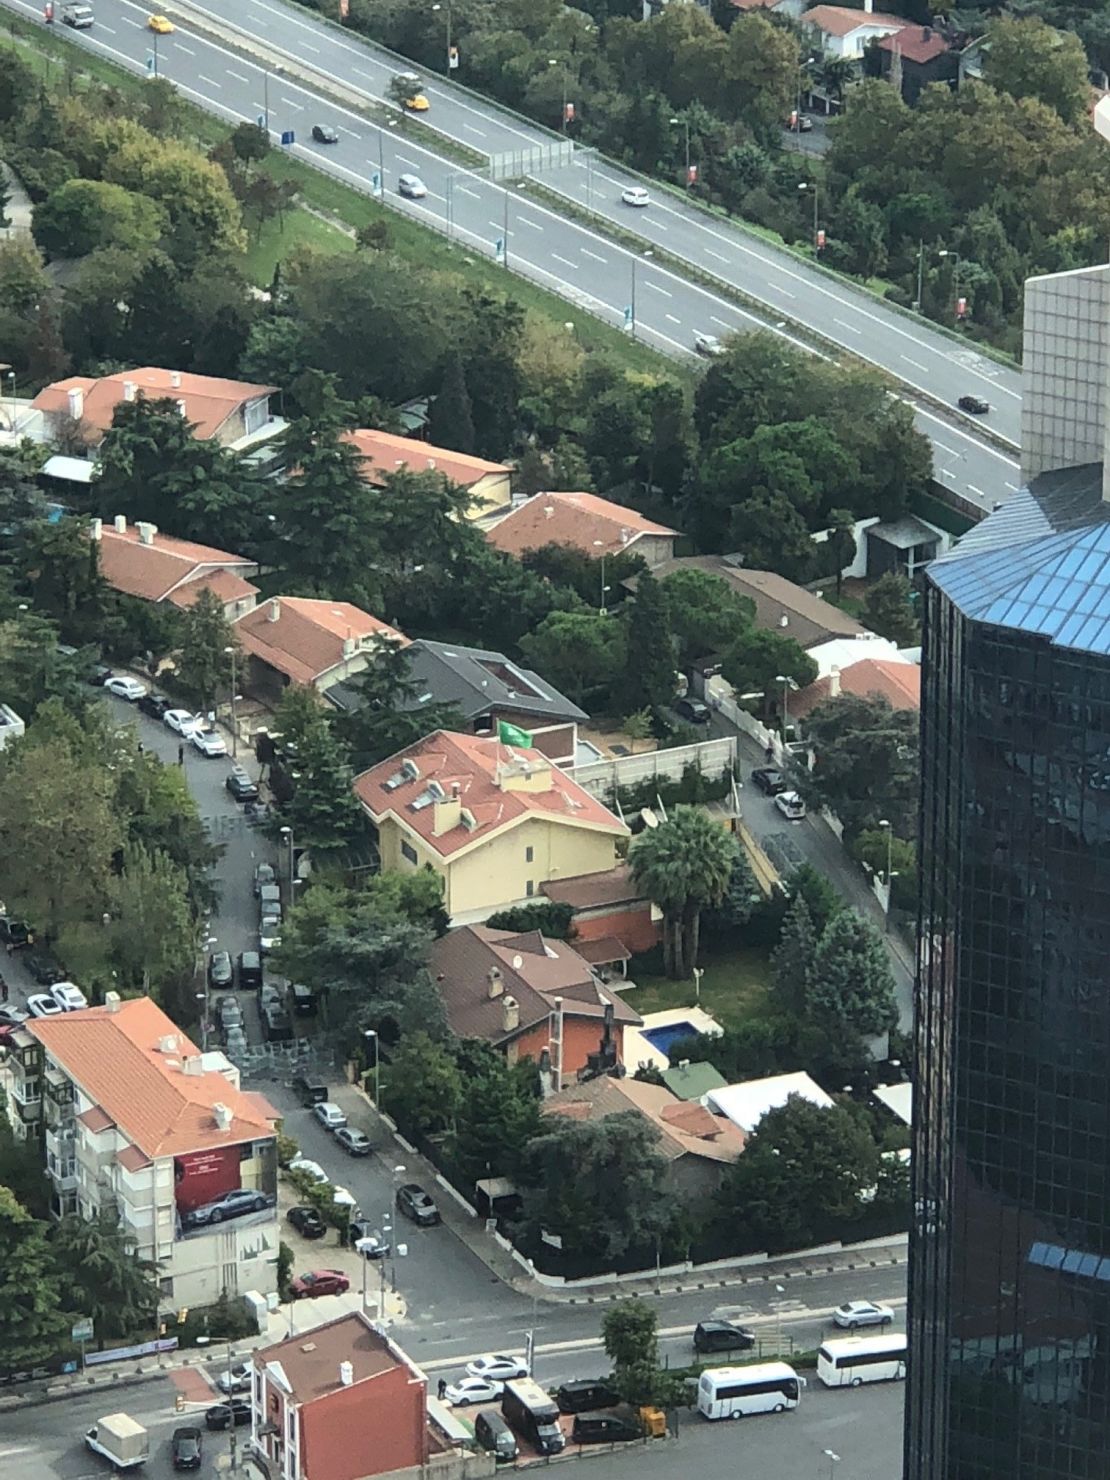 An aerial image of the Saudi consulate in Istanbul.